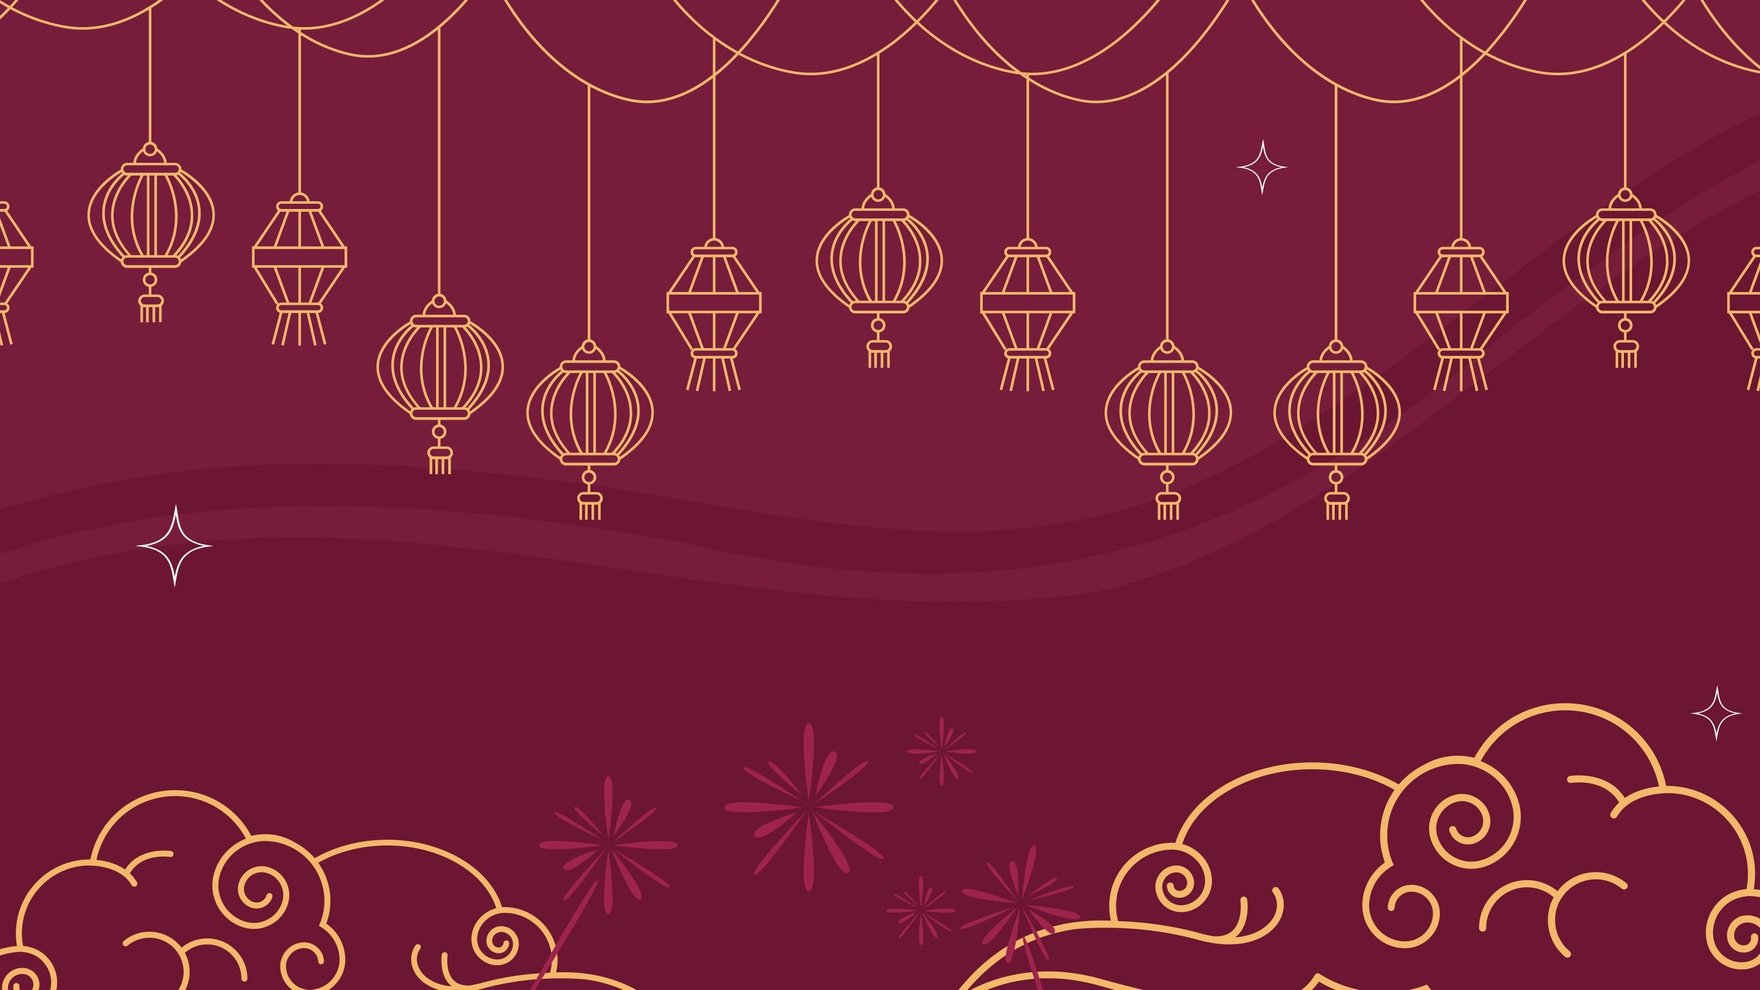 Free Chinese New Year Drawing Background in PDF, Illustrator, PSD, EPS, SVG, JPG, PNG